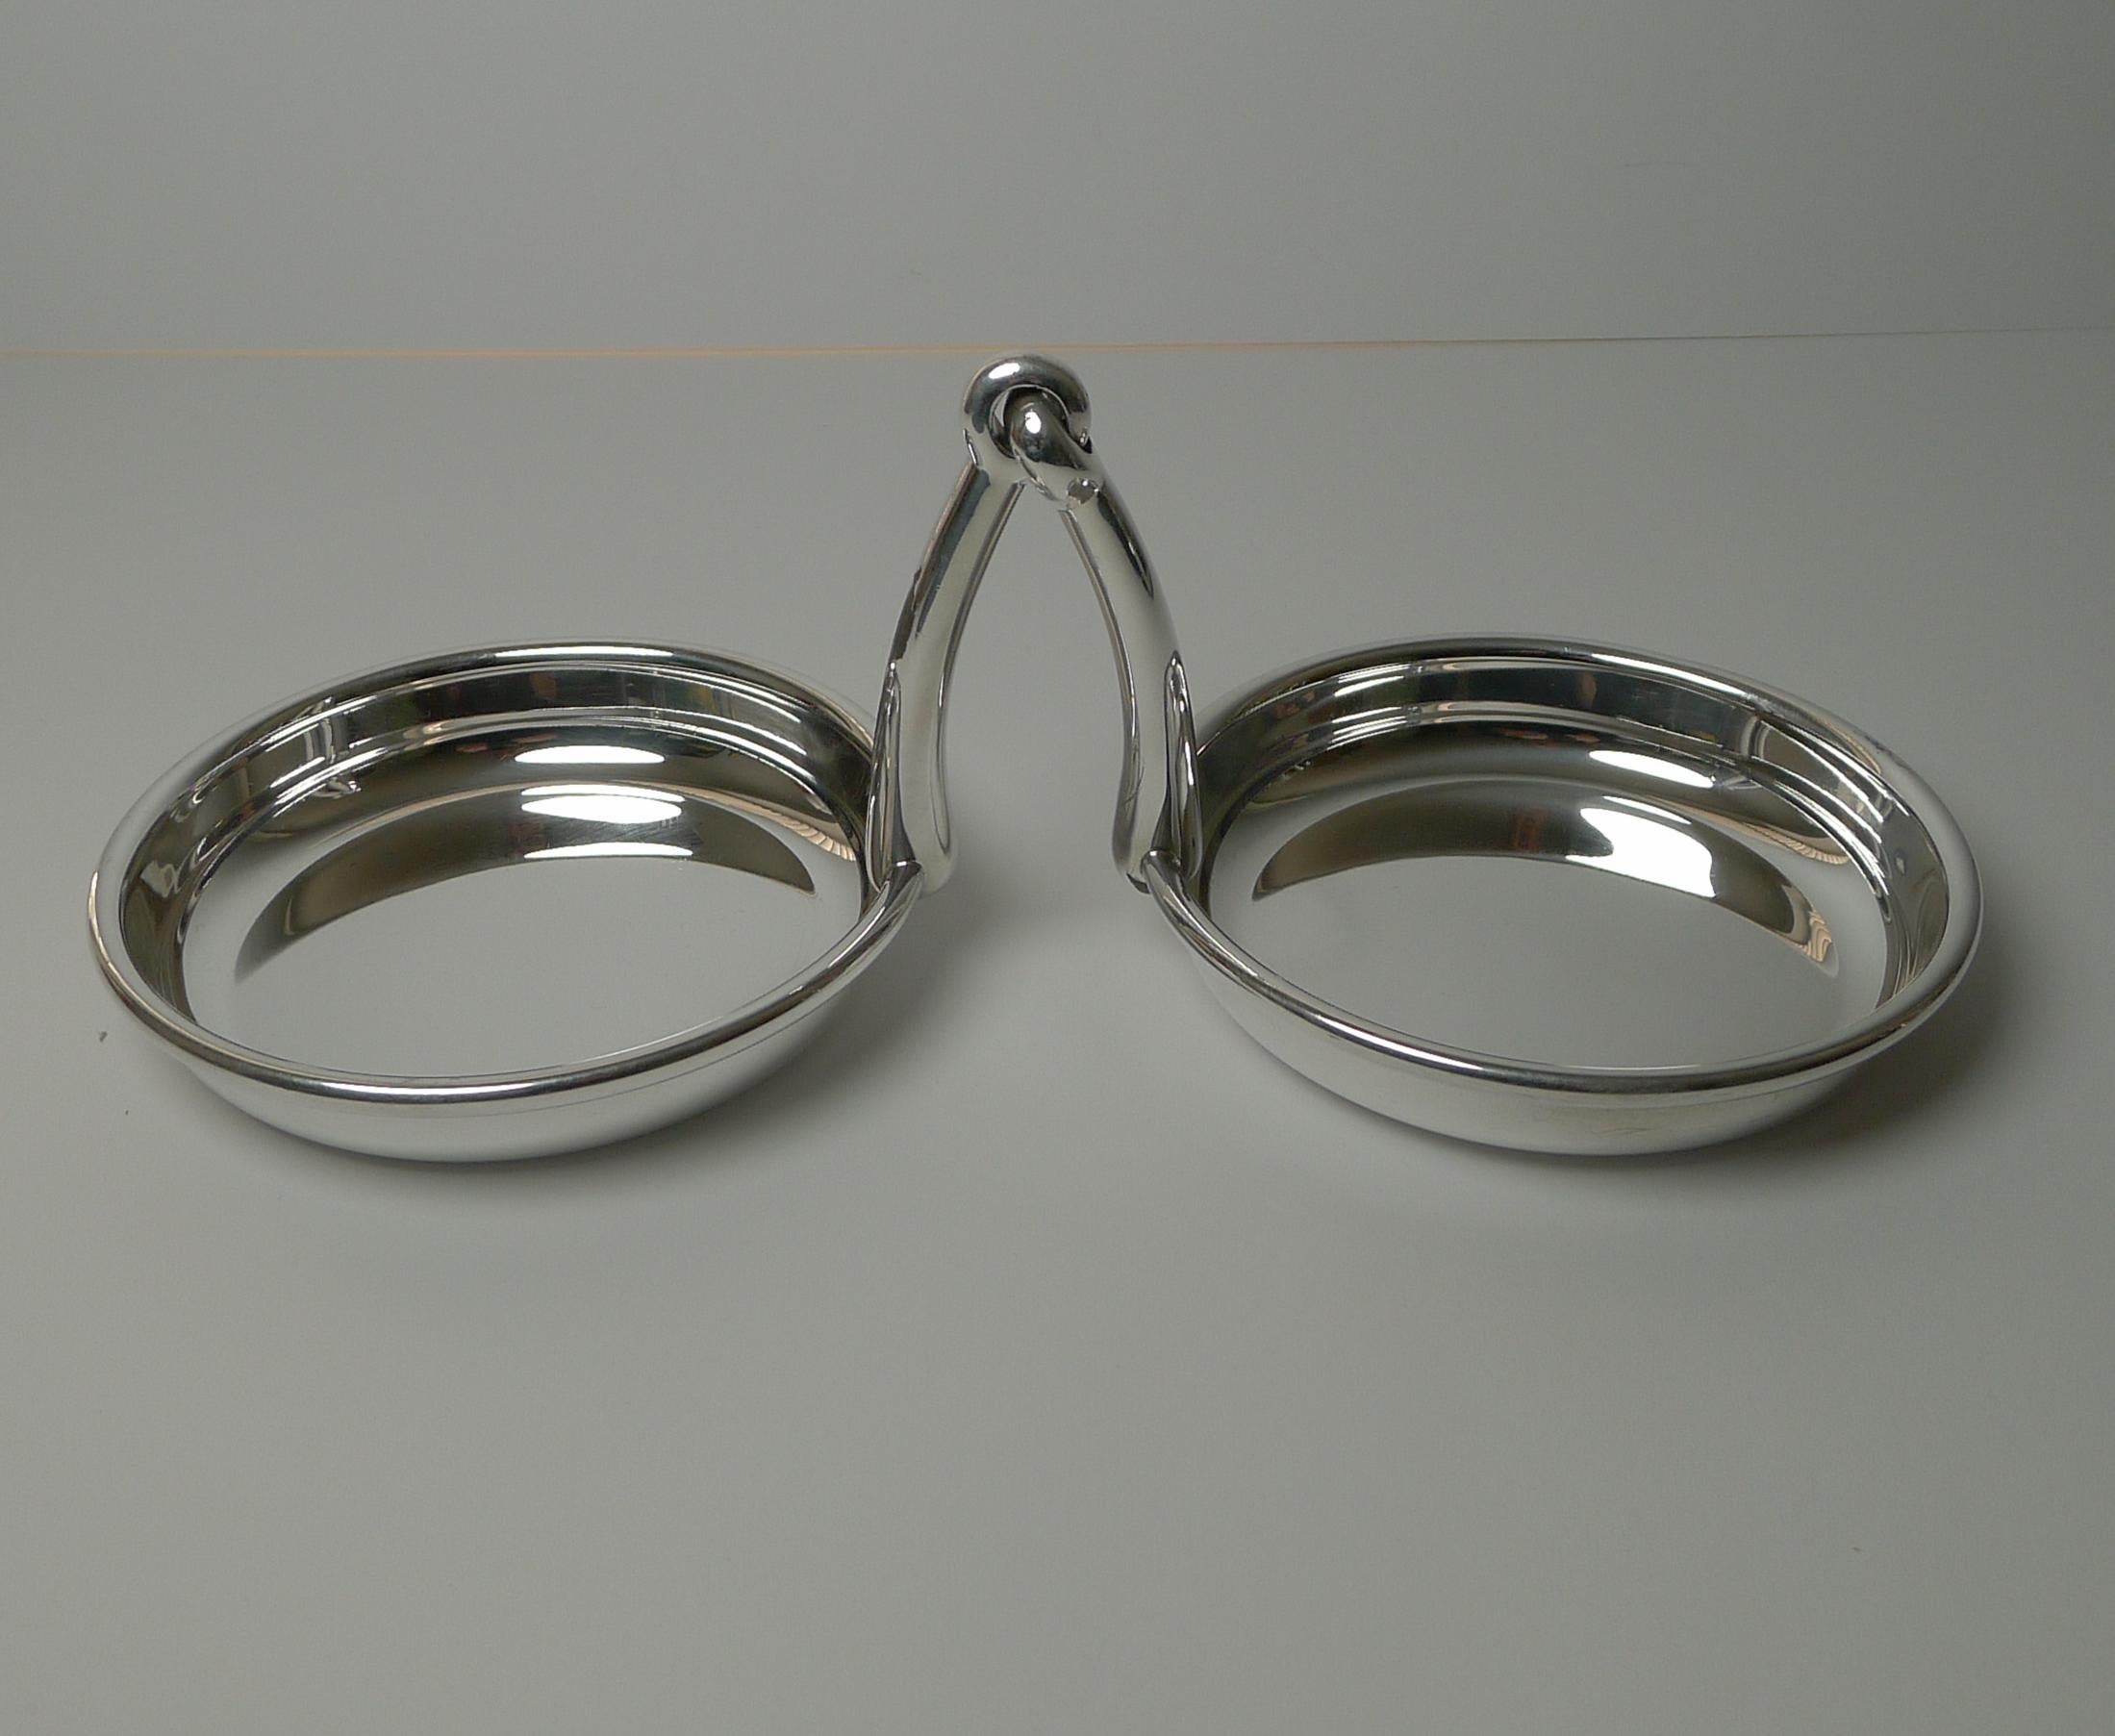 A handsome and rare pair of silver plated dishes or bowls jointed together with a decorative Horse Bit handle in the centre.

Just back from our silversmith's workshop where it has been professionally cleaned and polished, restoring it to it's